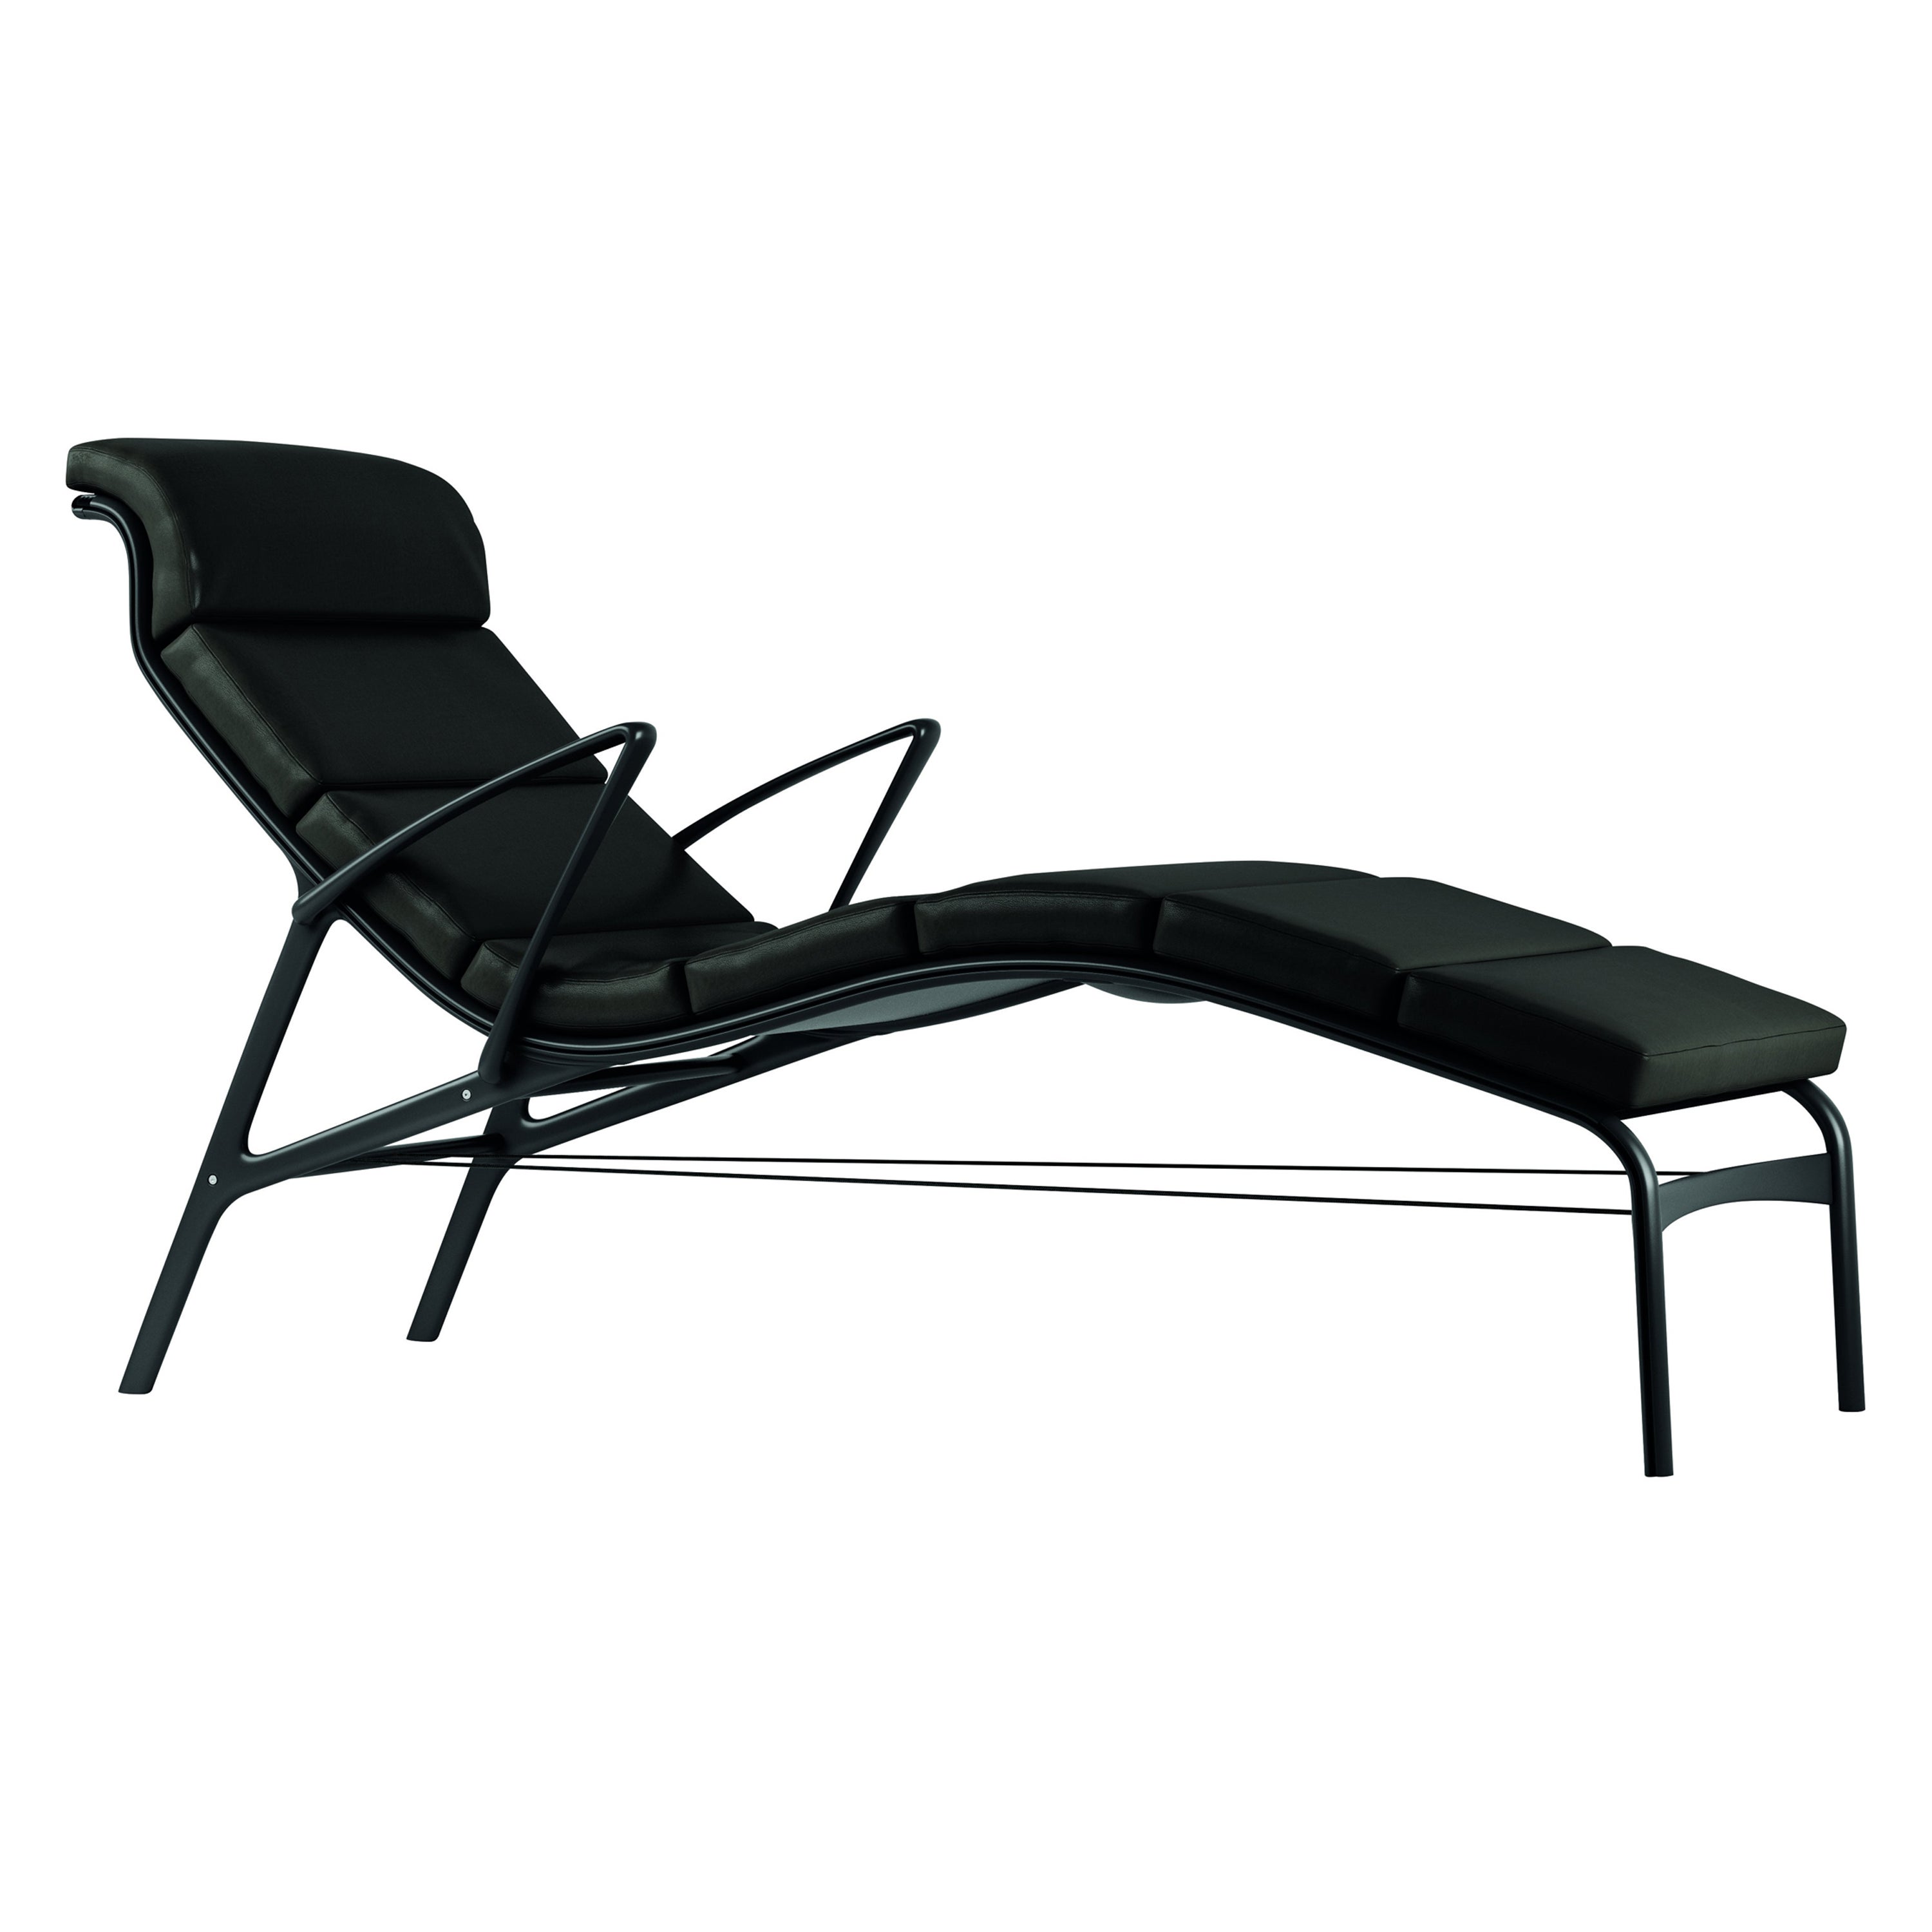 Alias 415 Longframe Soft Chair in Black Leather Seat & Lacquered Aluminum Frame